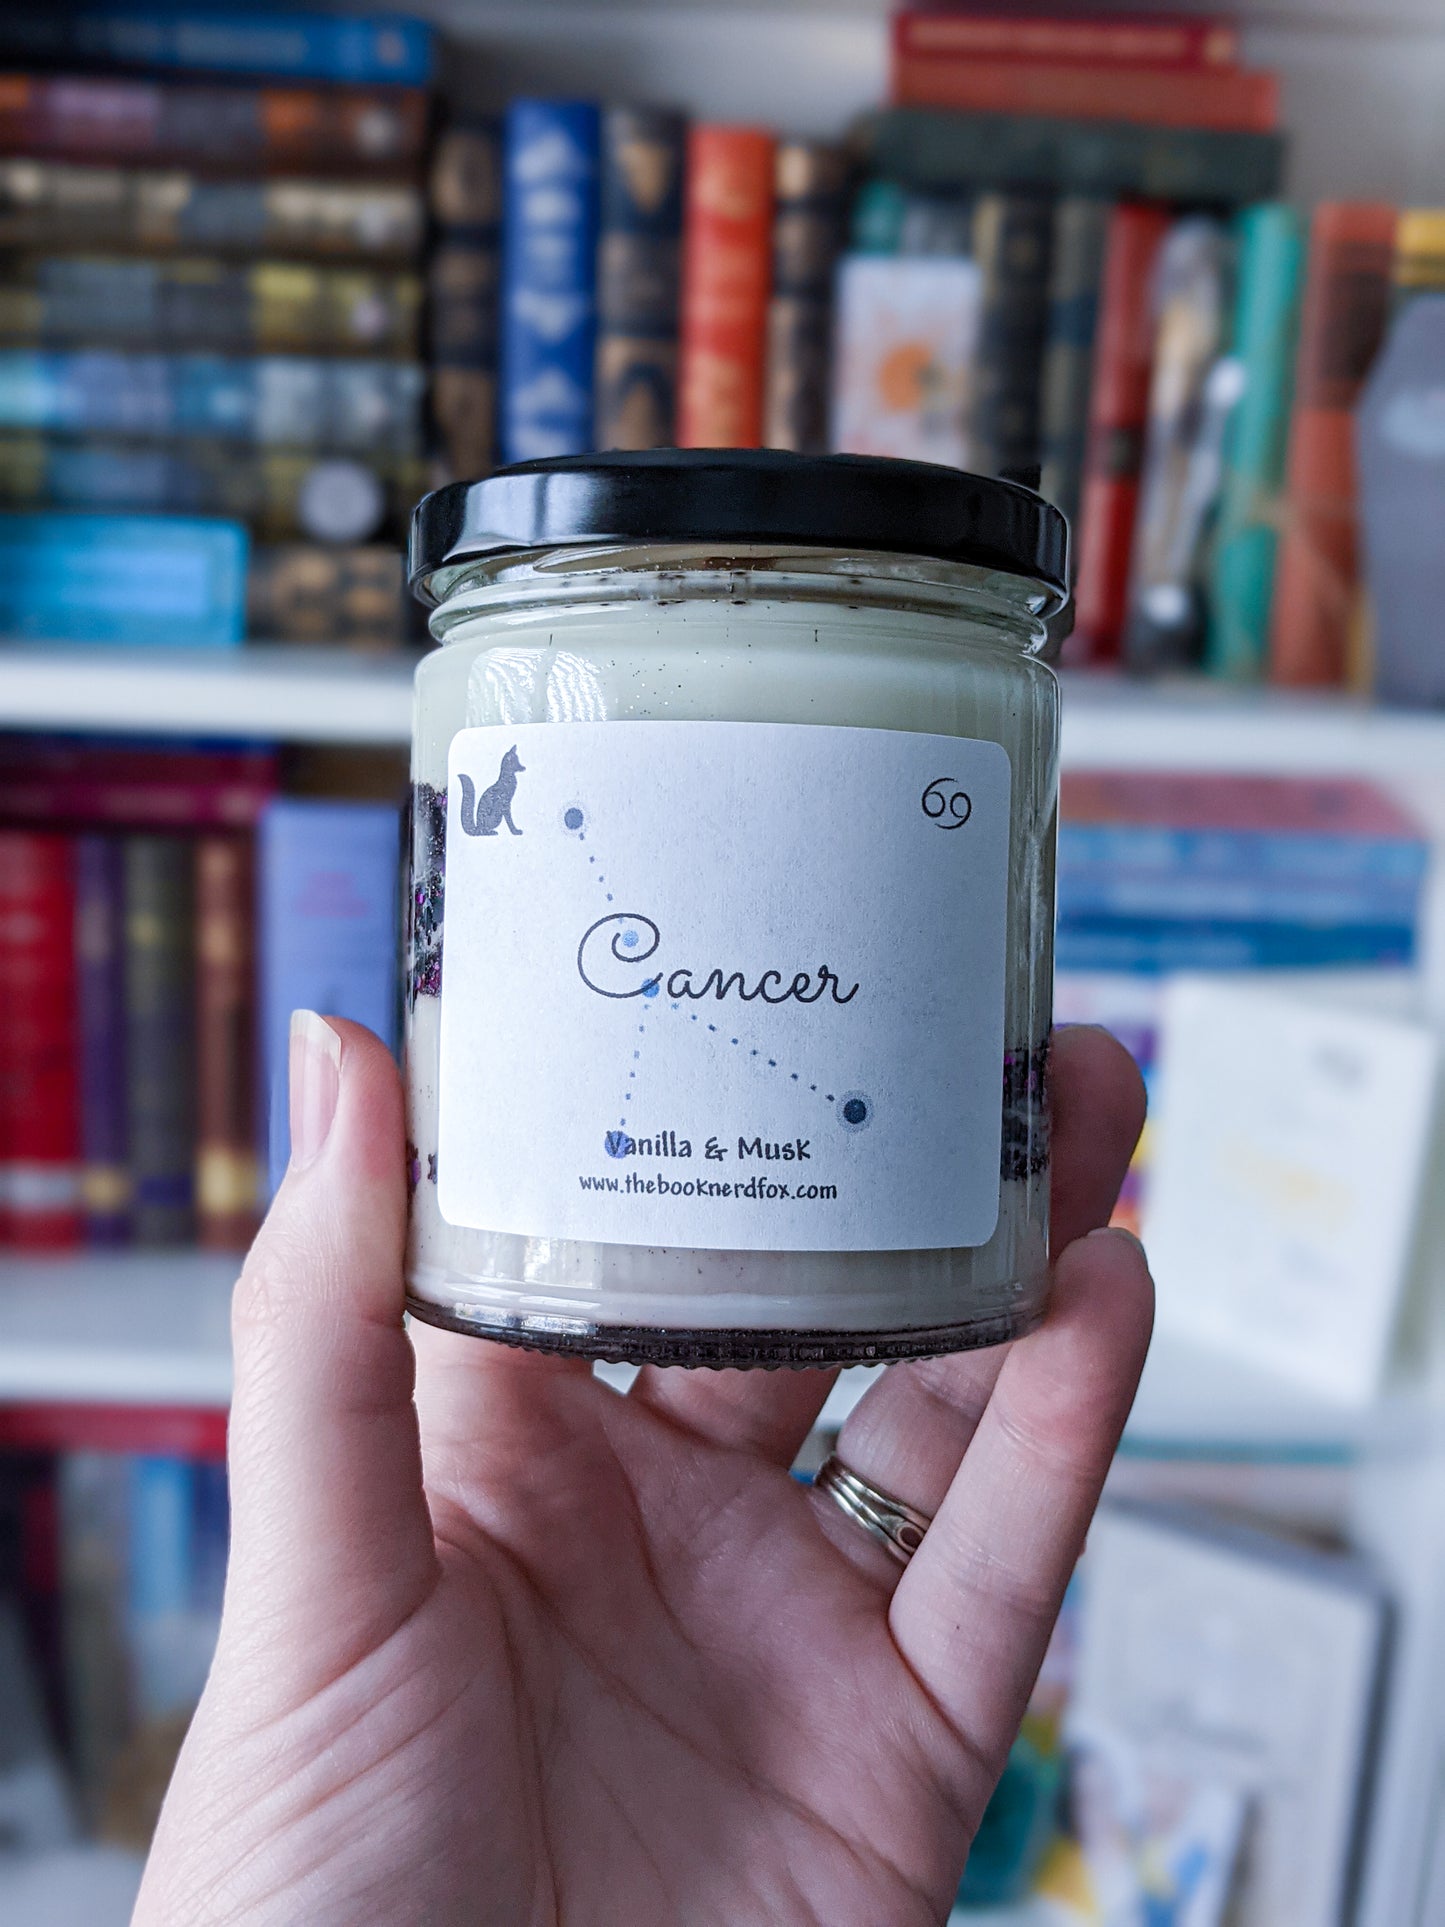 Cancer Candle - Vanilla & Musk